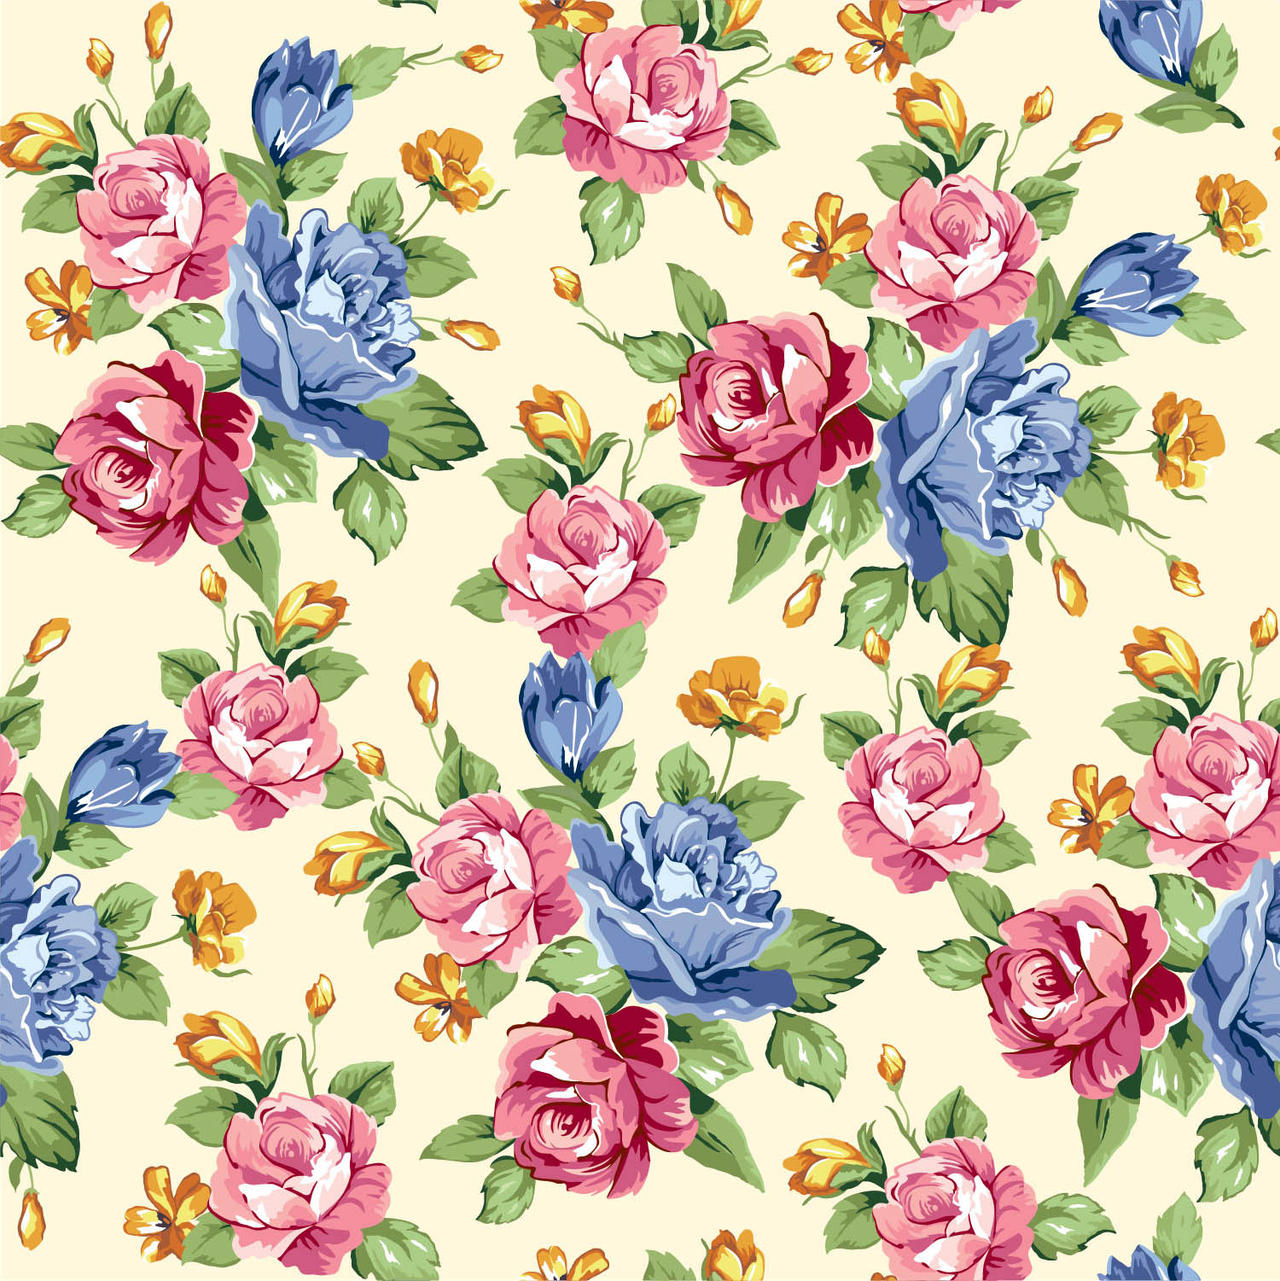 seamless-floral-print-25-by-doncabanza-on-deviantart